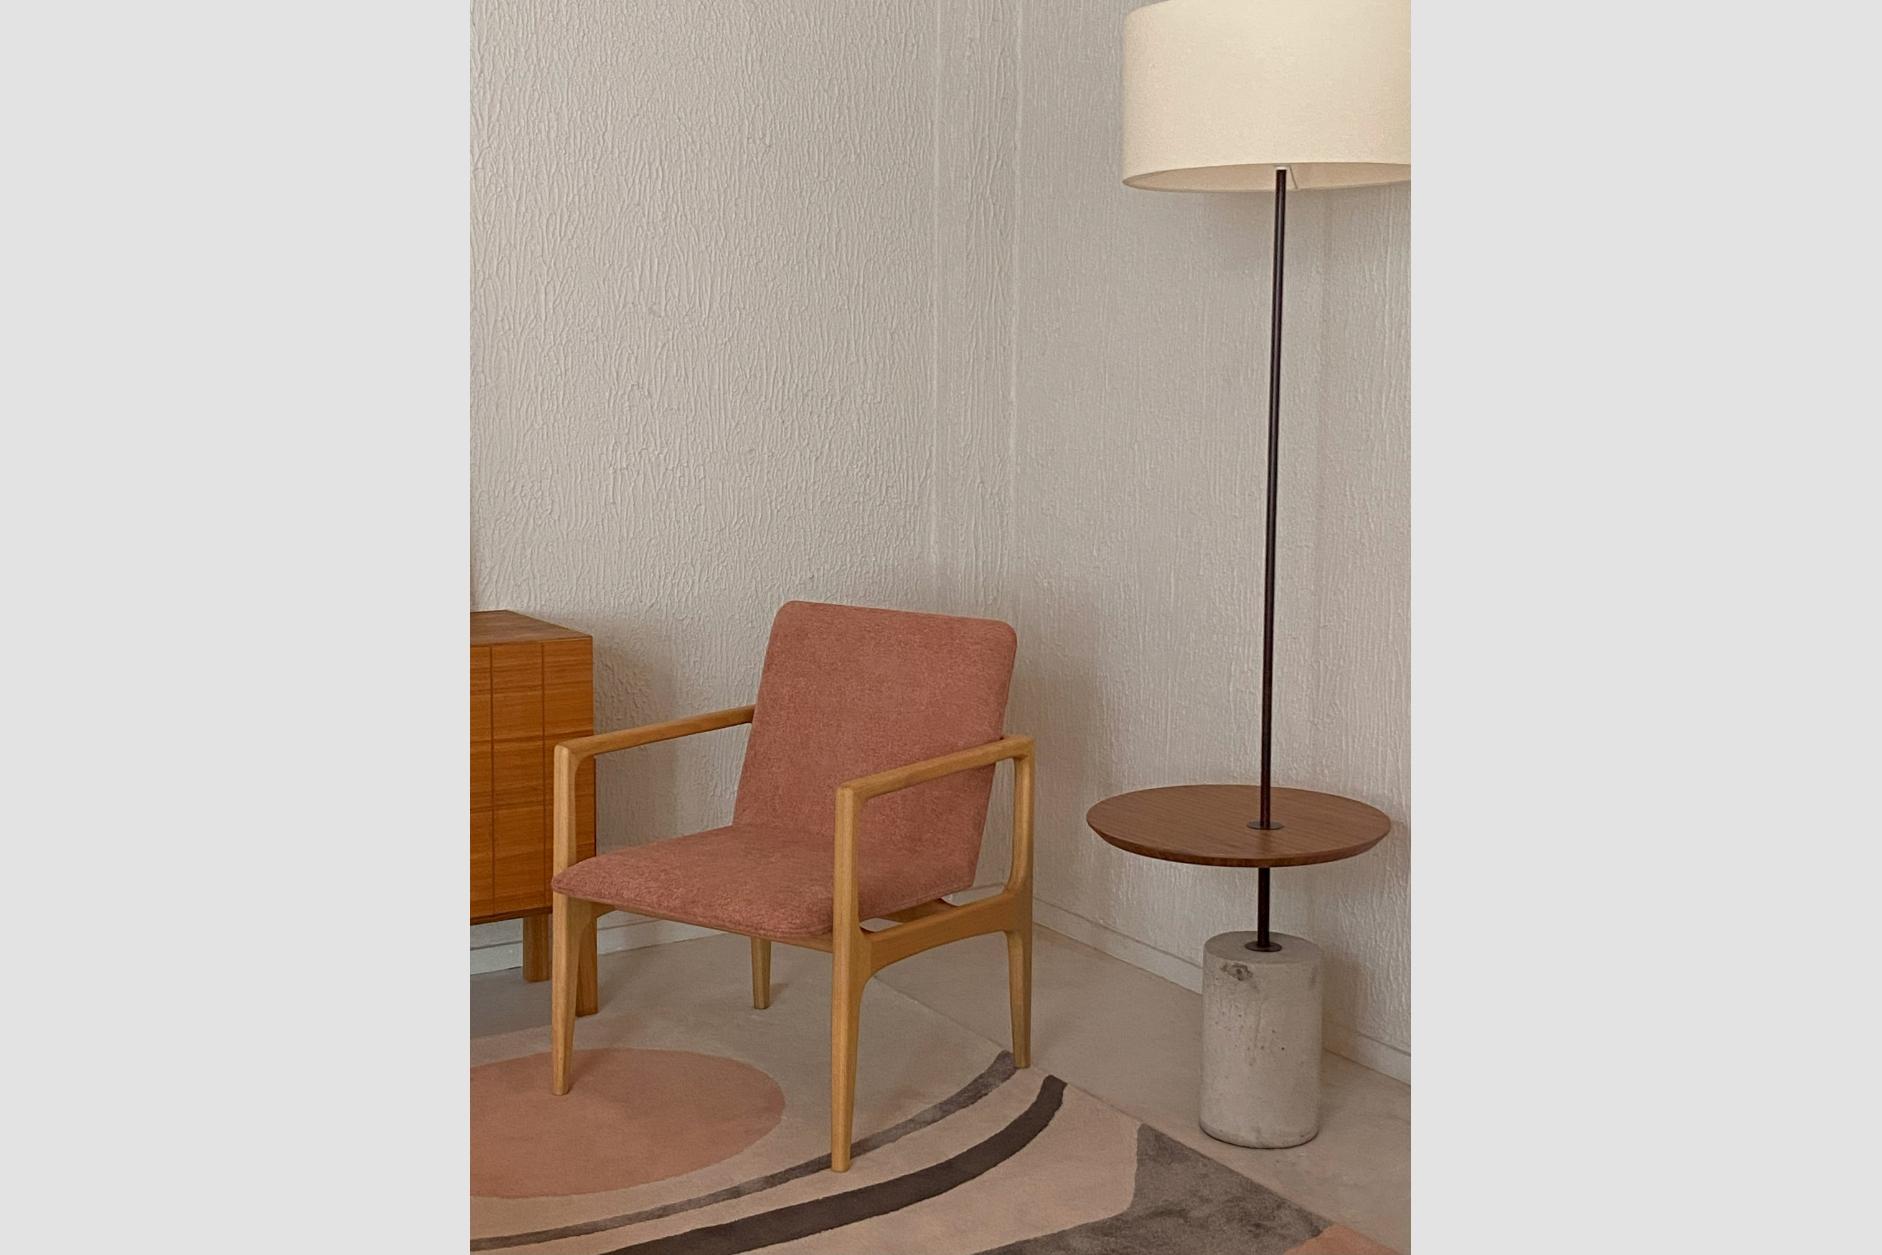 Giro Minimalist Floor Lamp In Painted Steel, Walnut and Concrete In New Condition For Sale In Sao Paulo, Sao Paulo